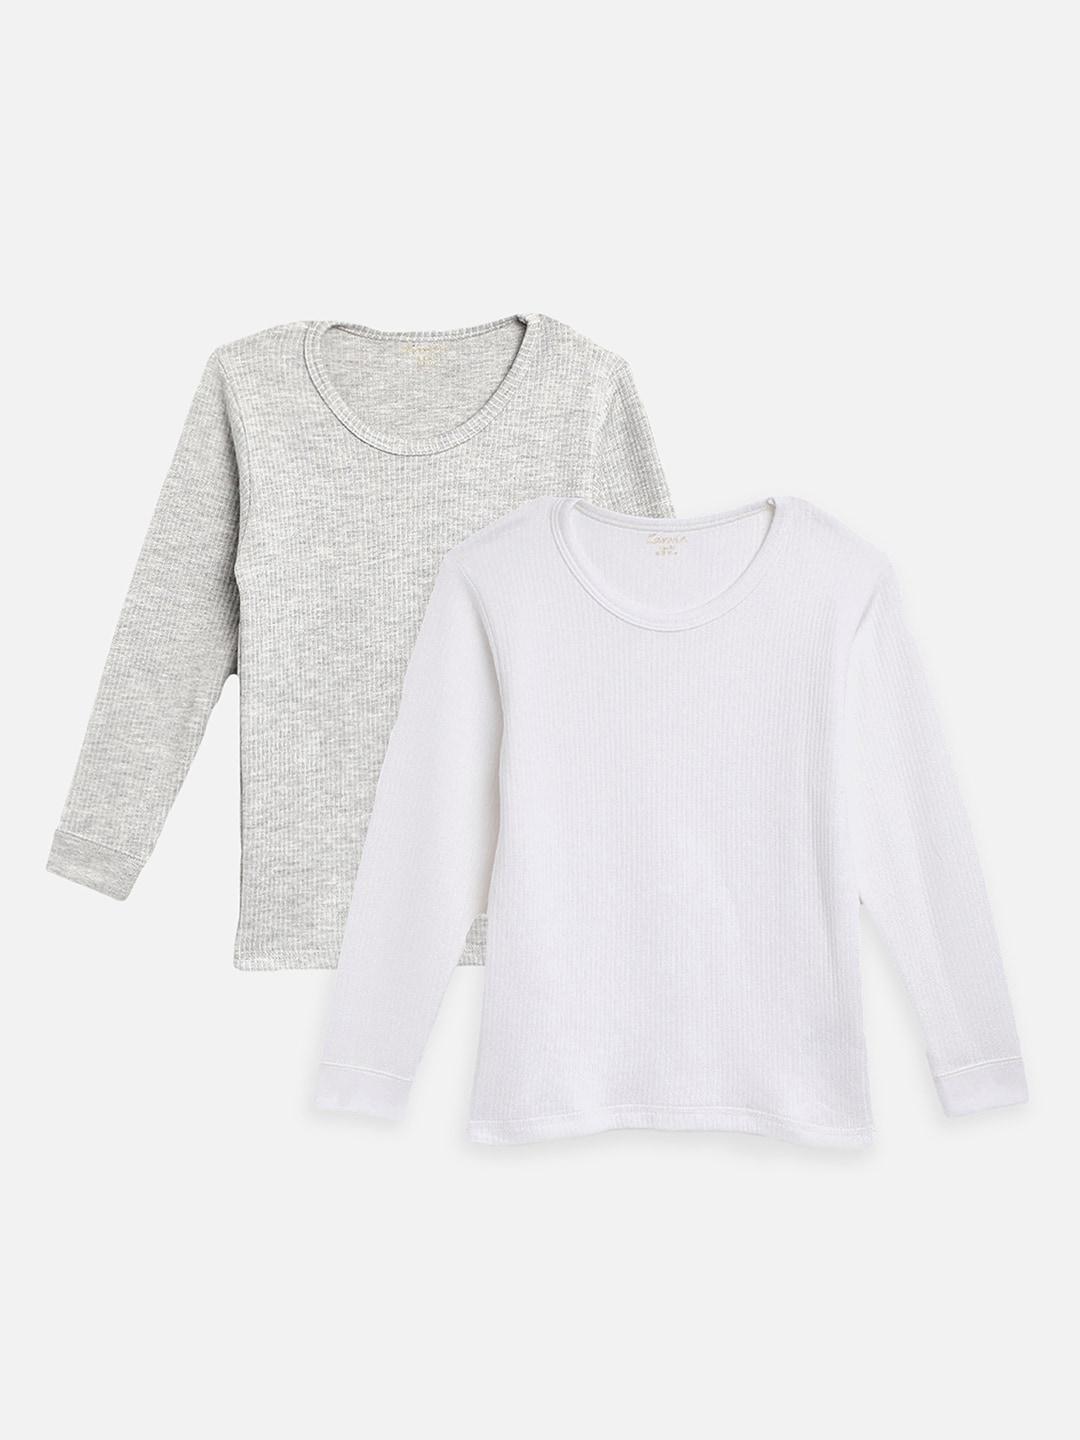 Kanvin Boys Pack Of 2 White & Grey Melange Ribbed Cotton Thermal Tops